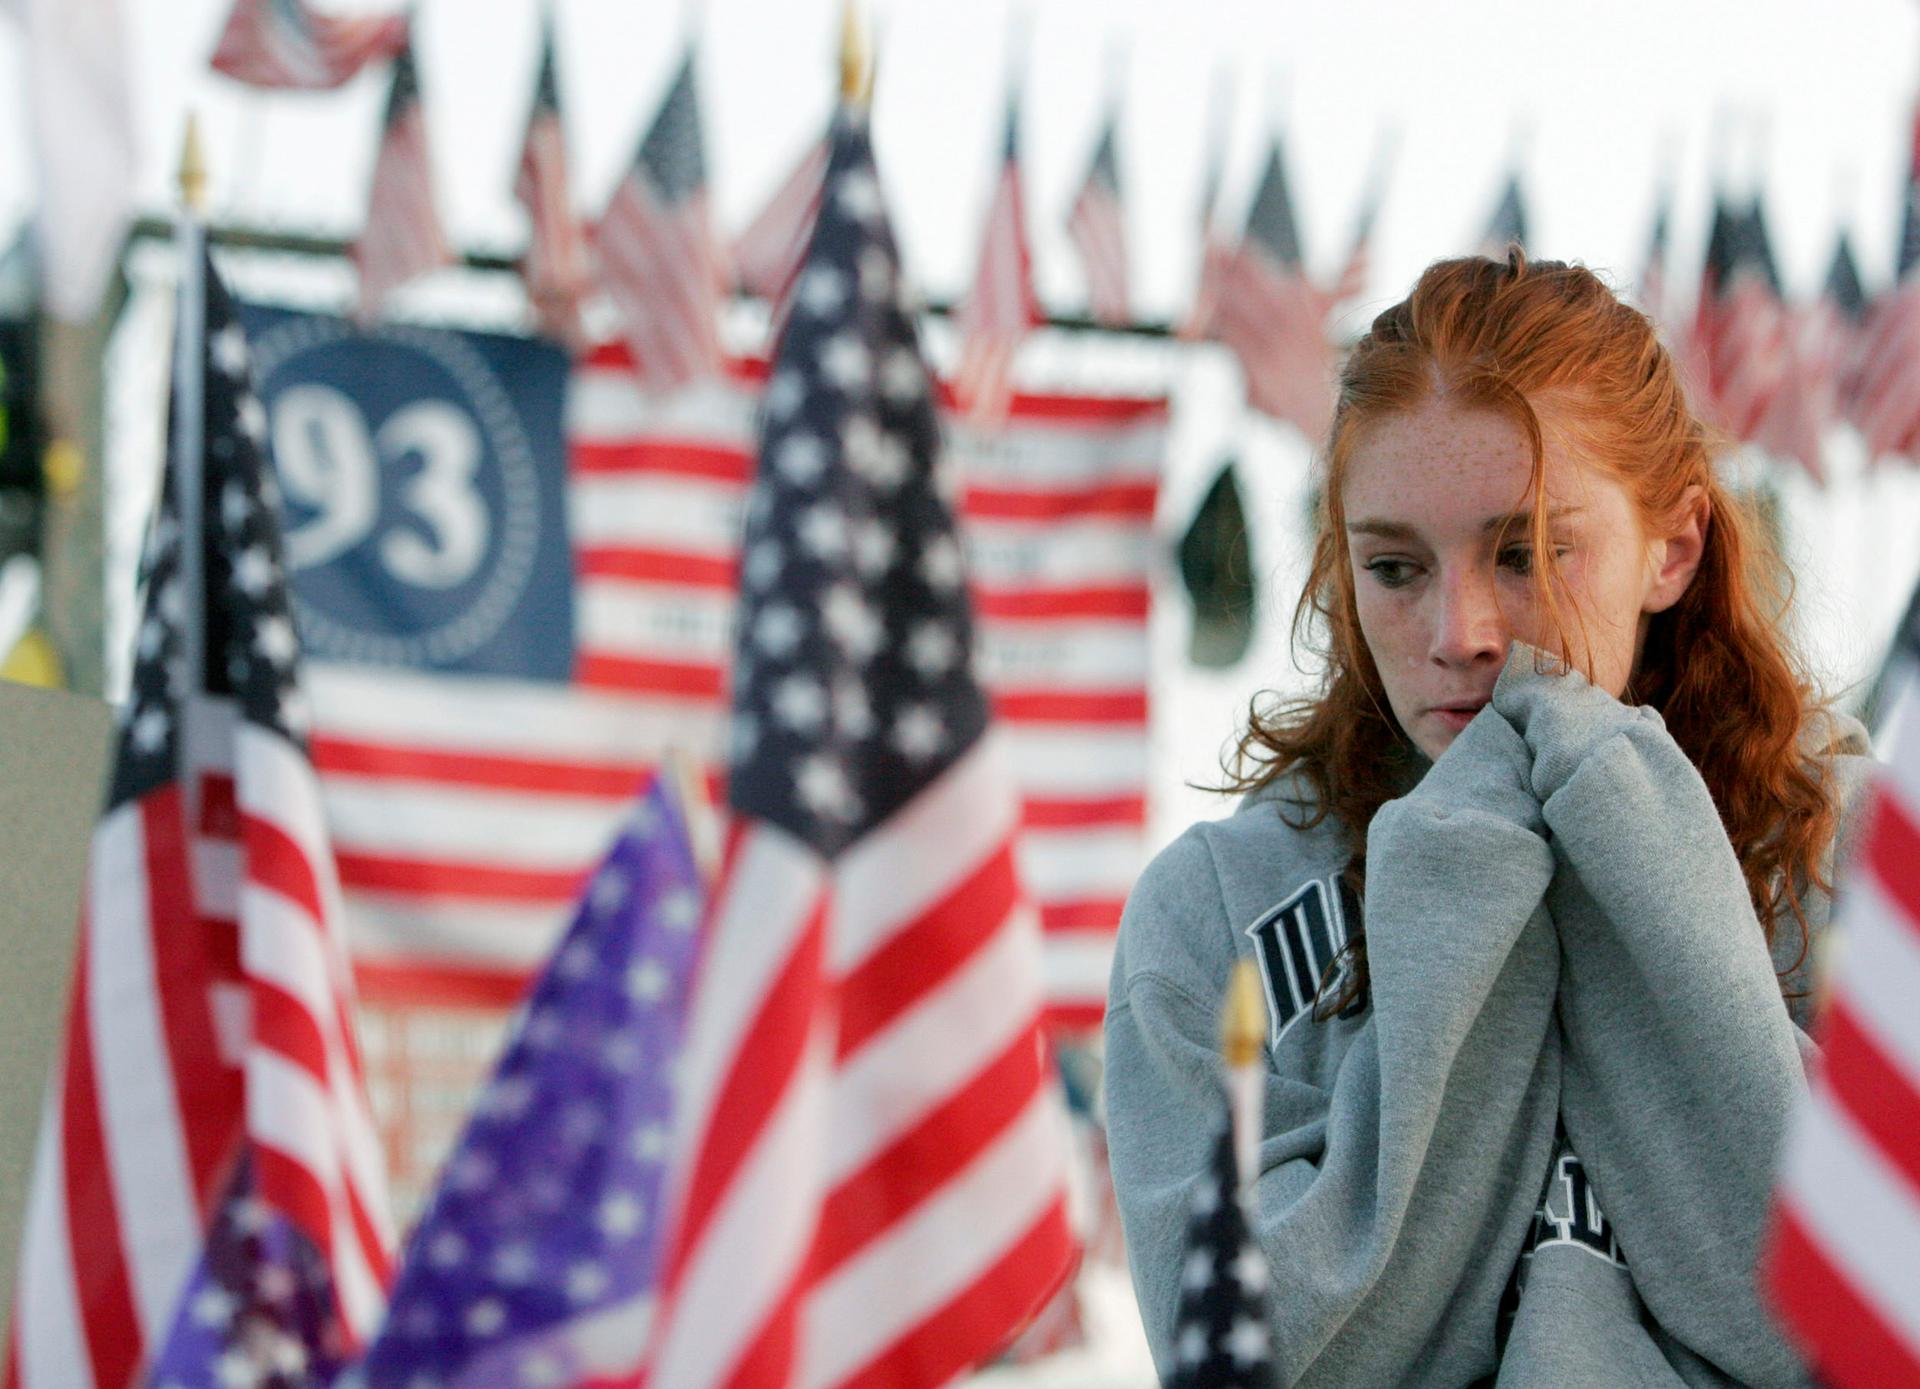 Courtney Ball, 19, of Sommerville, New Jersey, cries at the Flight 93 Temporary Memorial just outside Shanksville, Pennsylvania, September 11, 2005.